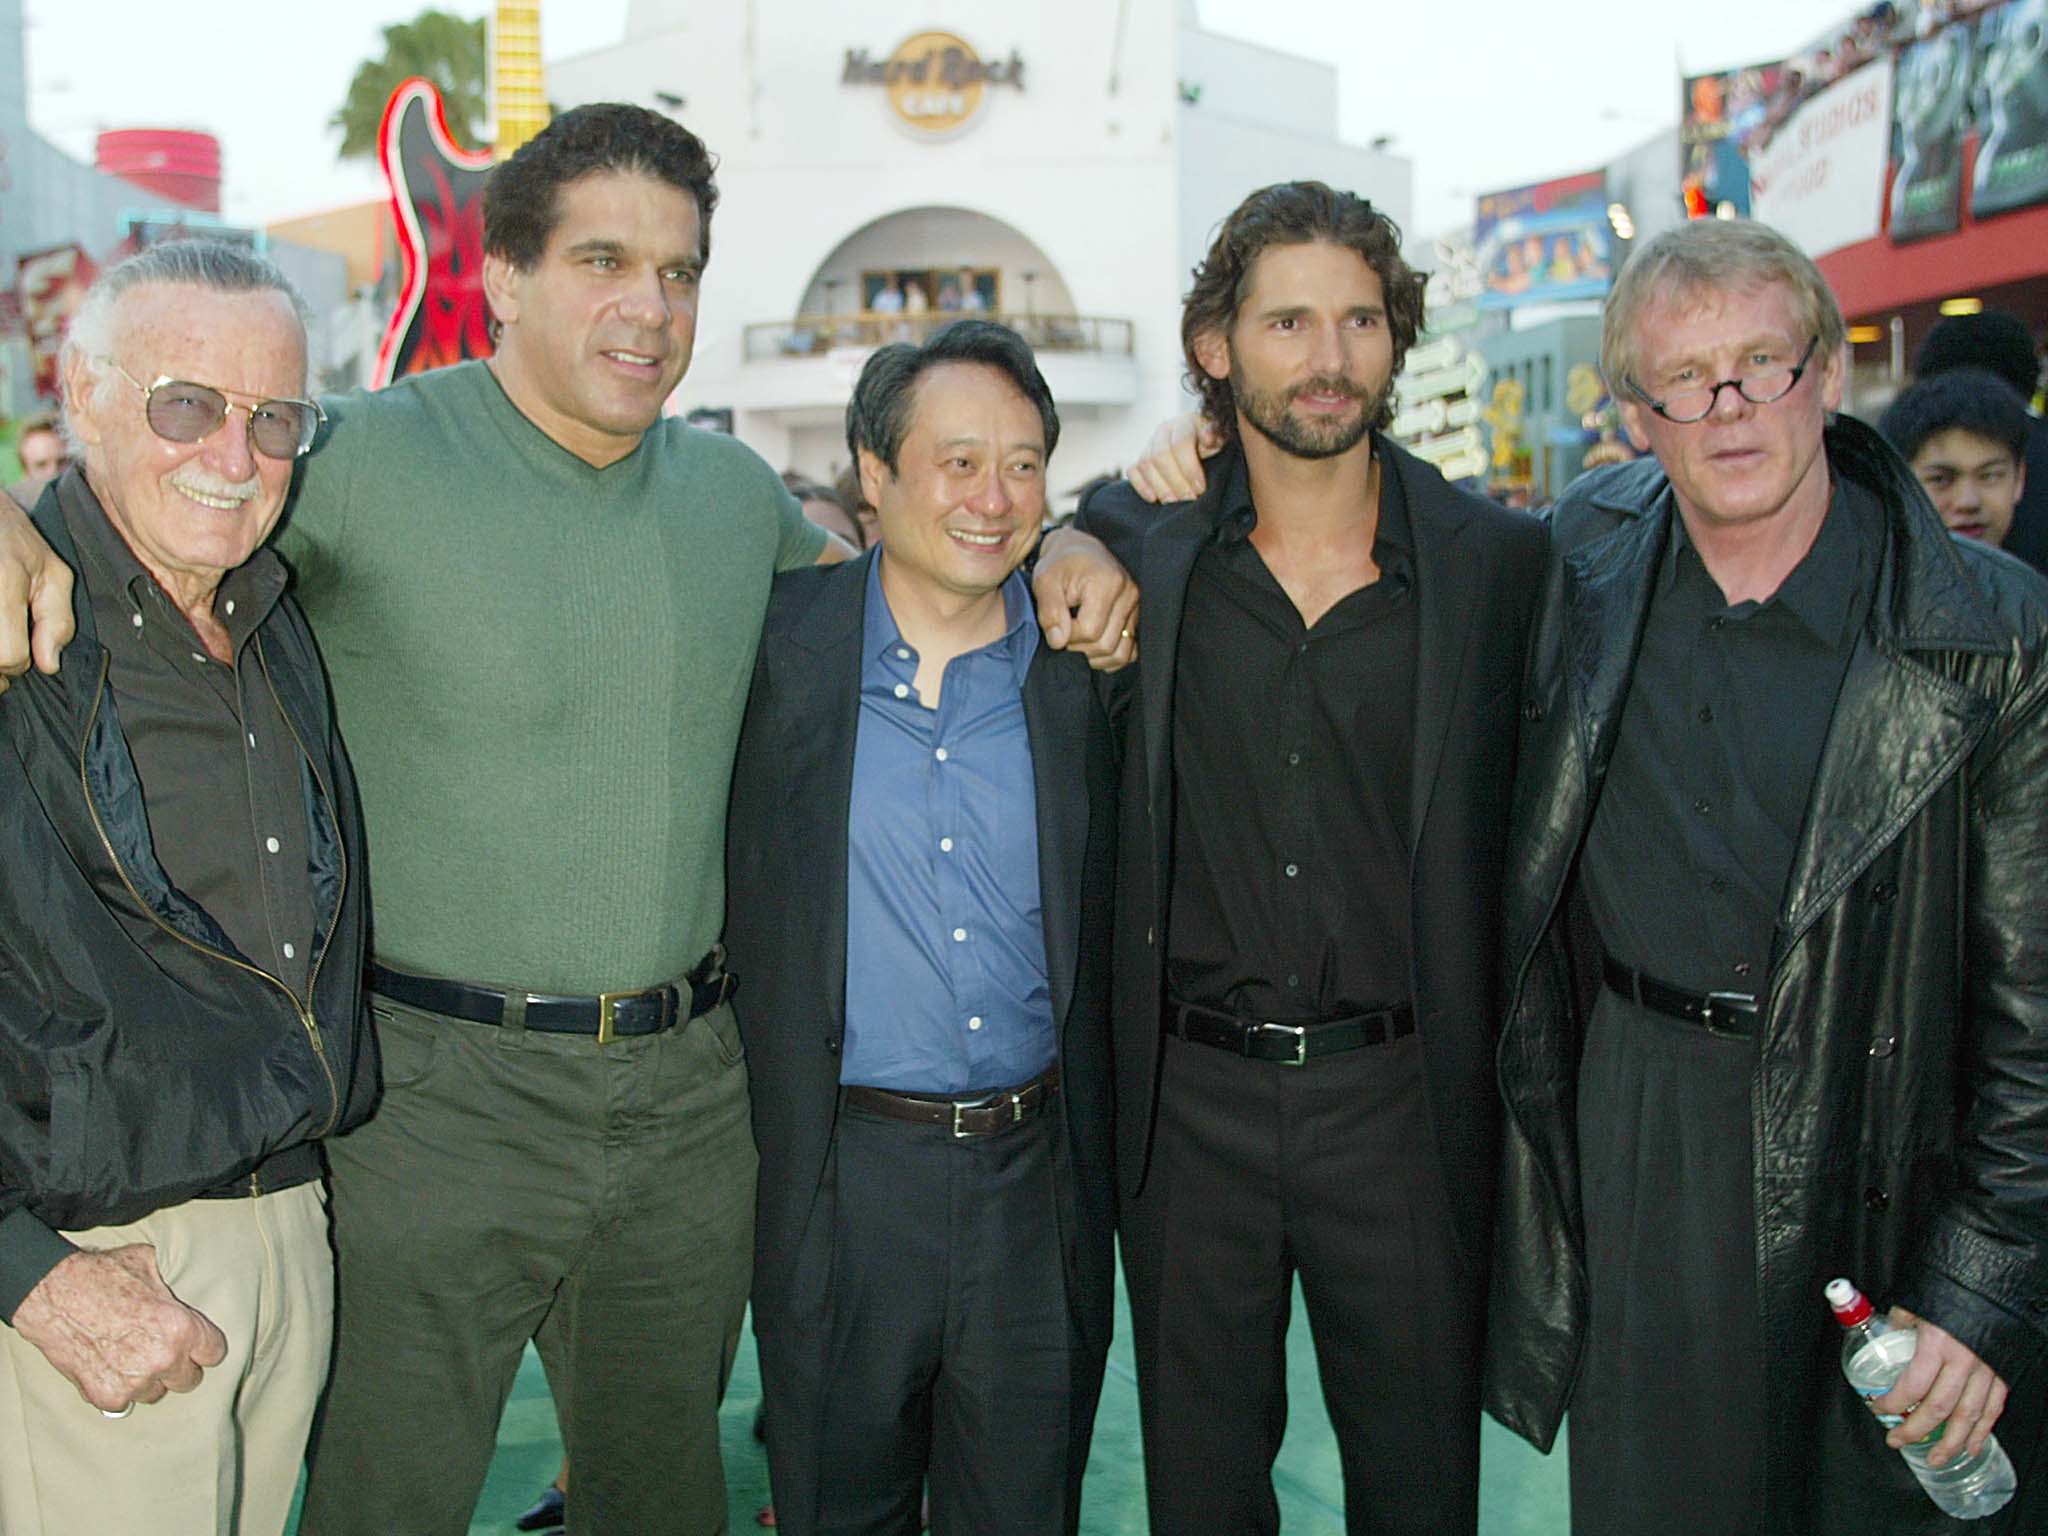 Stan Lee, Lou Ferrigno, Ang Lee, Eric Bana and Nick Nolte at the ‘Hulk’ world premiere in June 2003